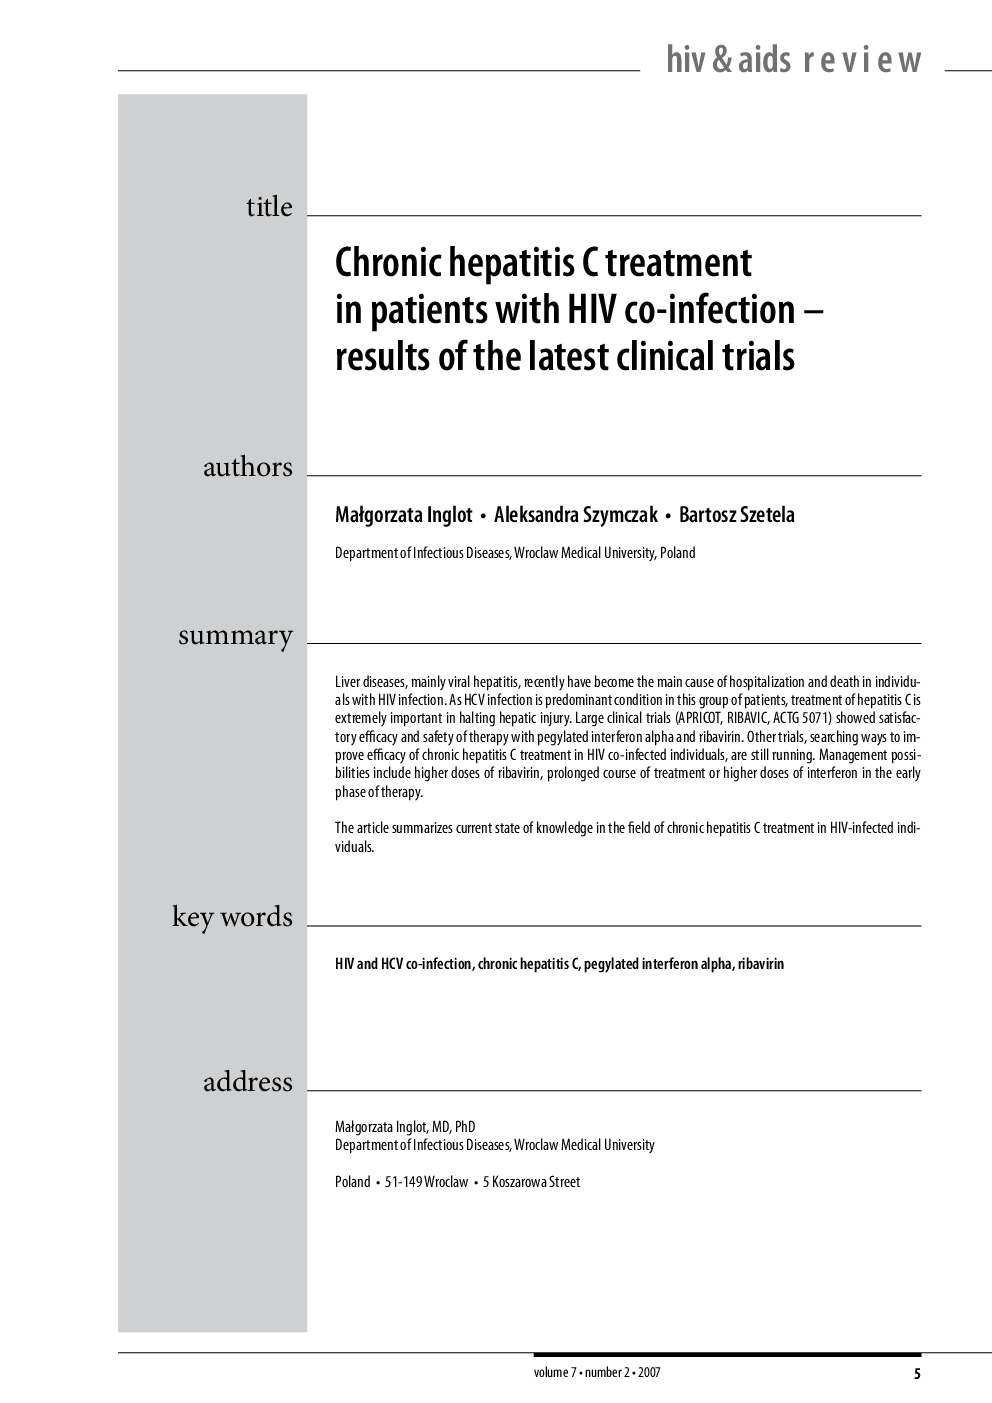 Chronic hepatitis C treatment in patients with HIV co-infection – results of the latest clinical trials